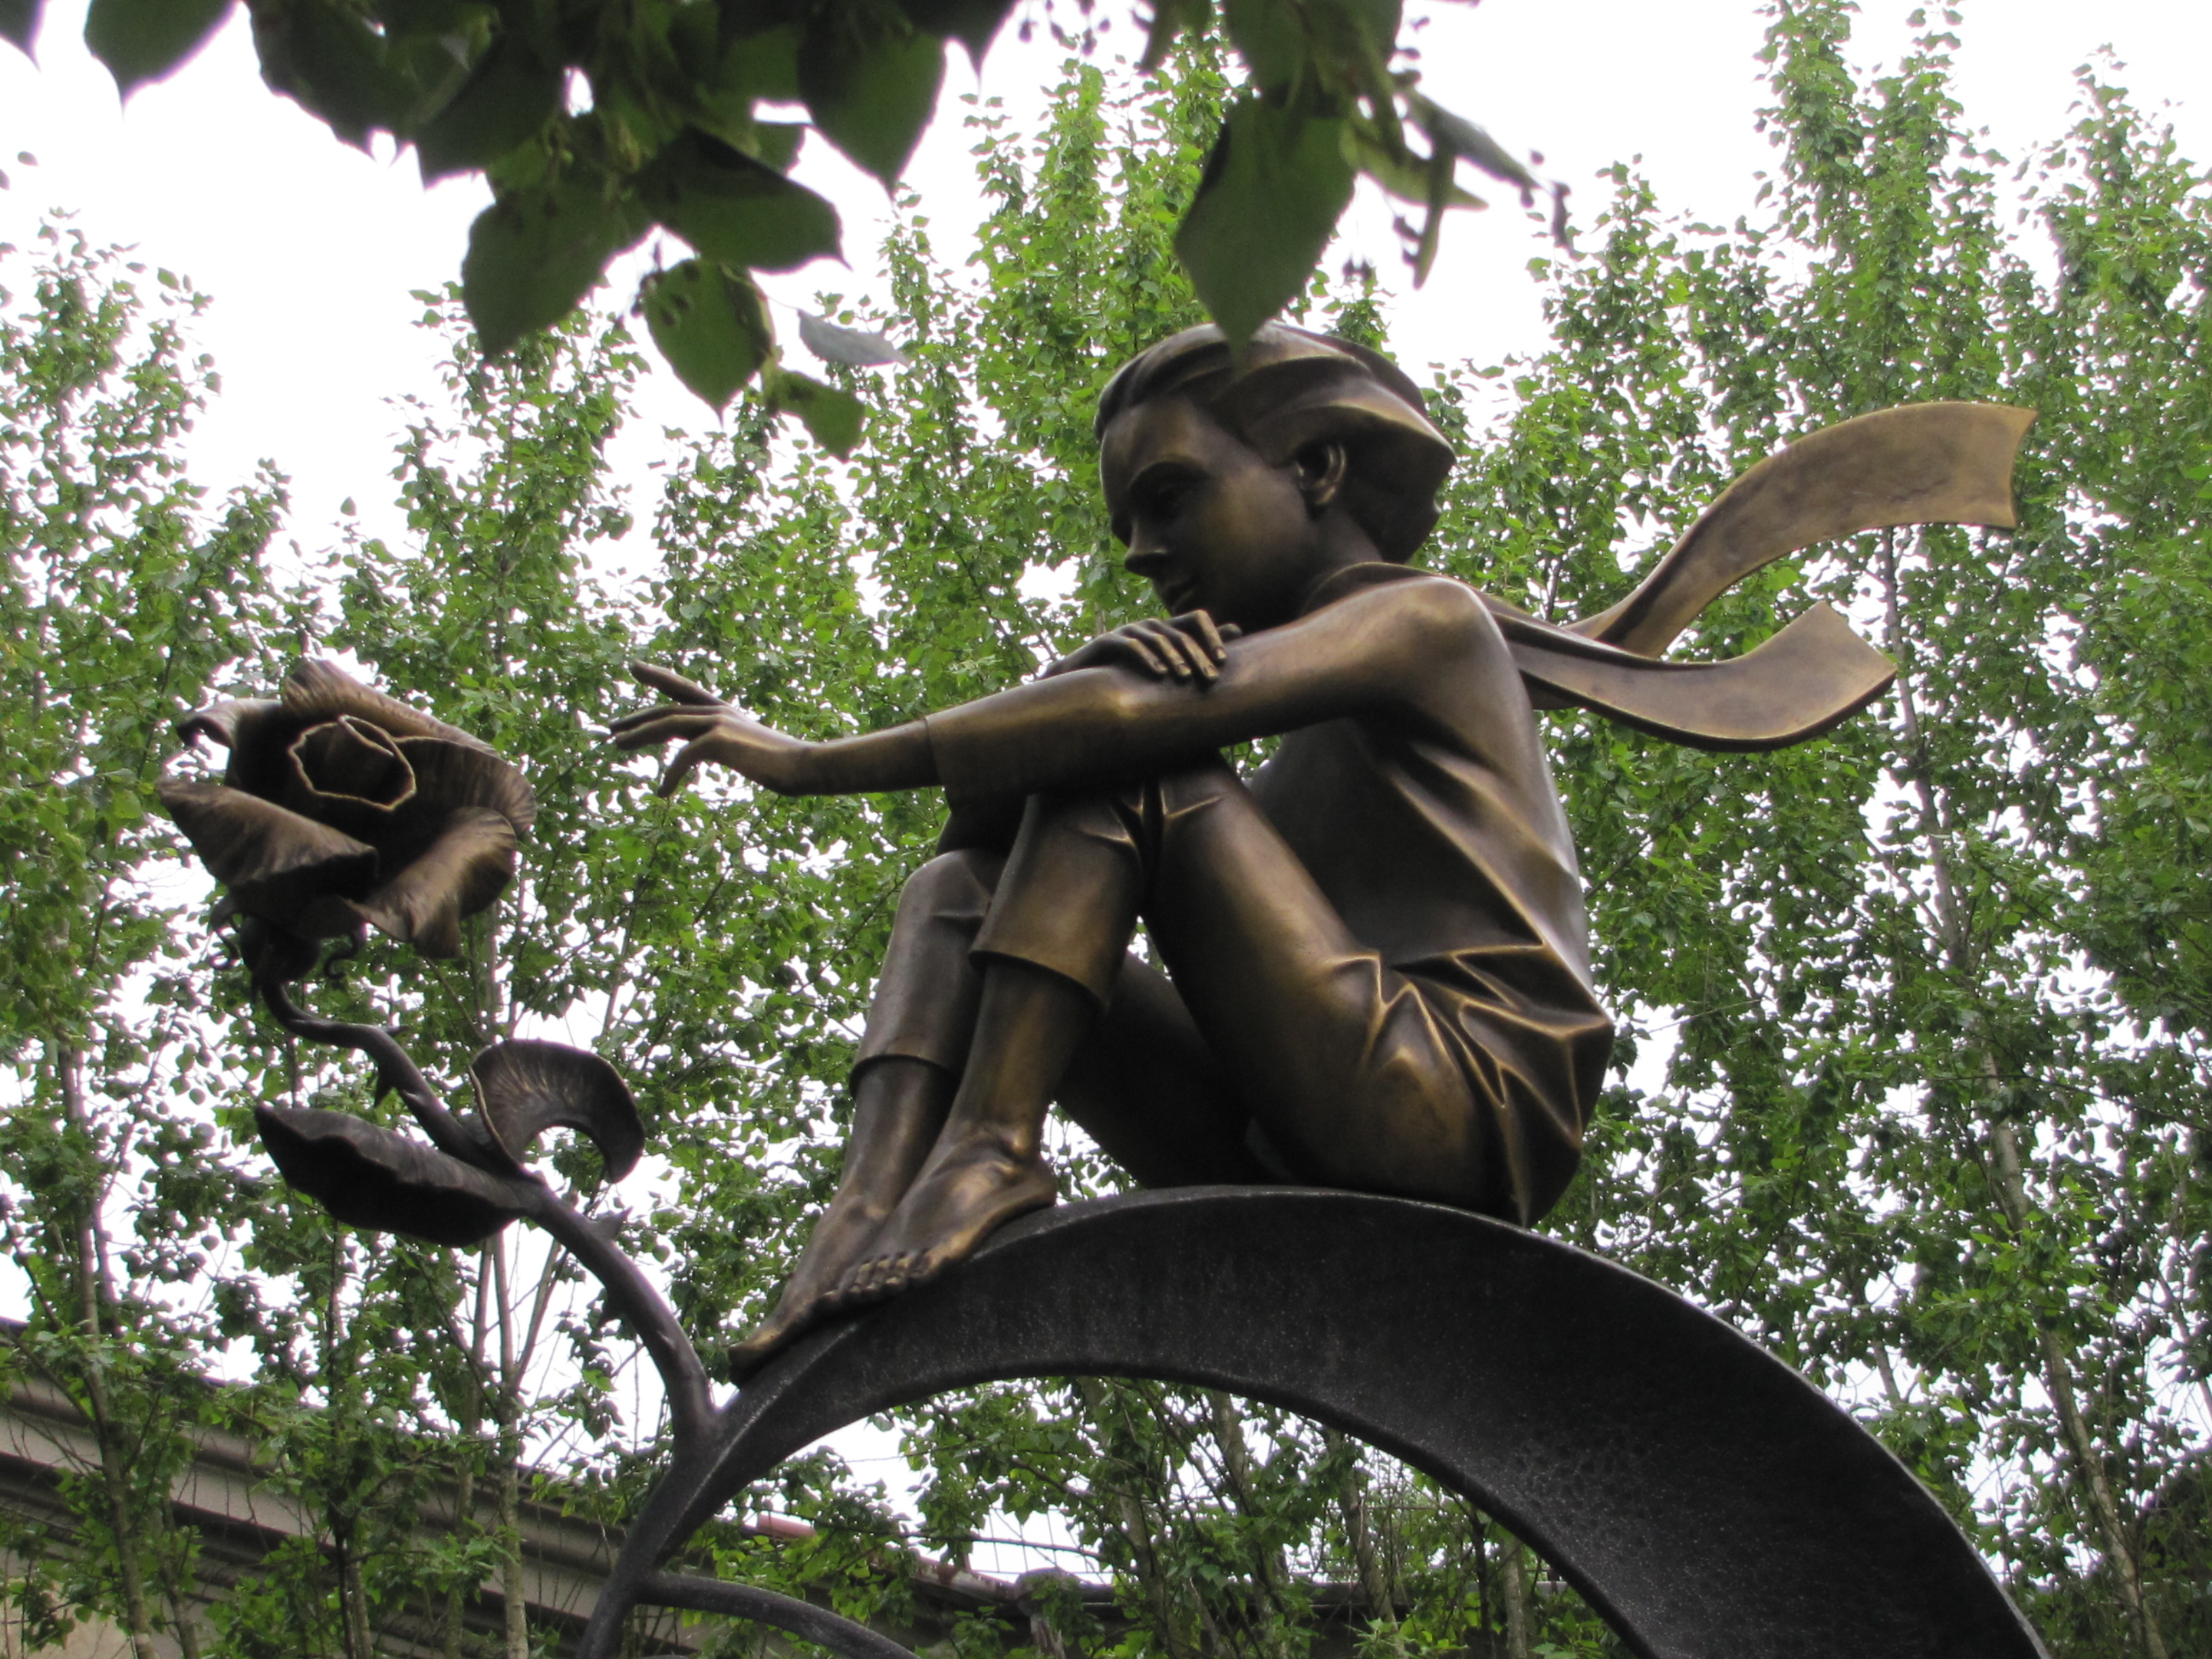 The Little Prince statue header image